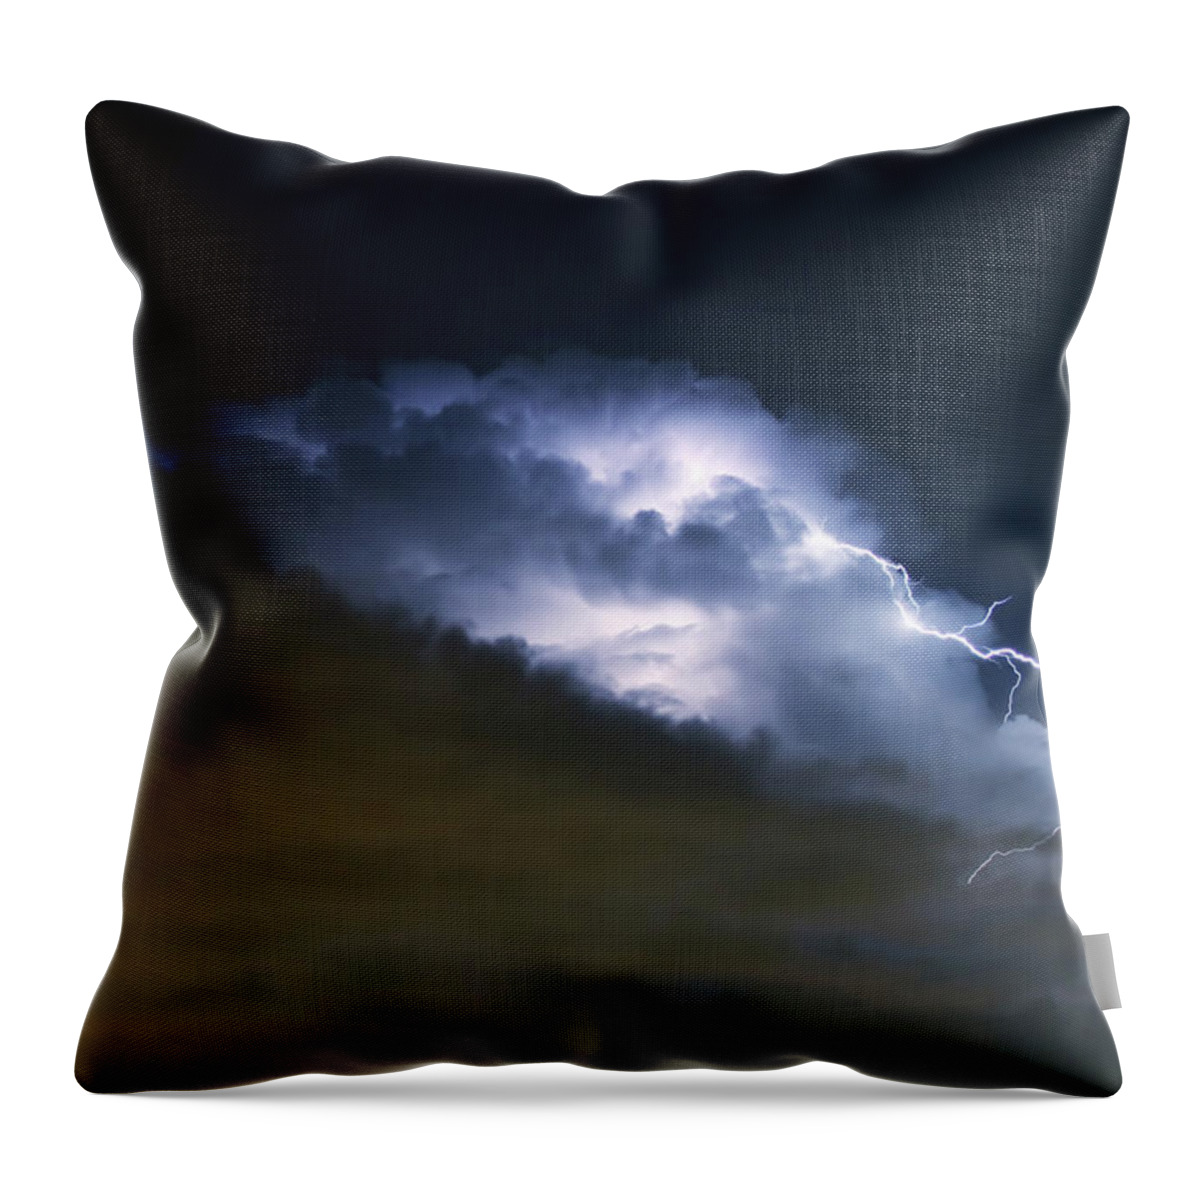 Environmental Damage Throw Pillow featuring the photograph Thunderstorm #1 by Nature247